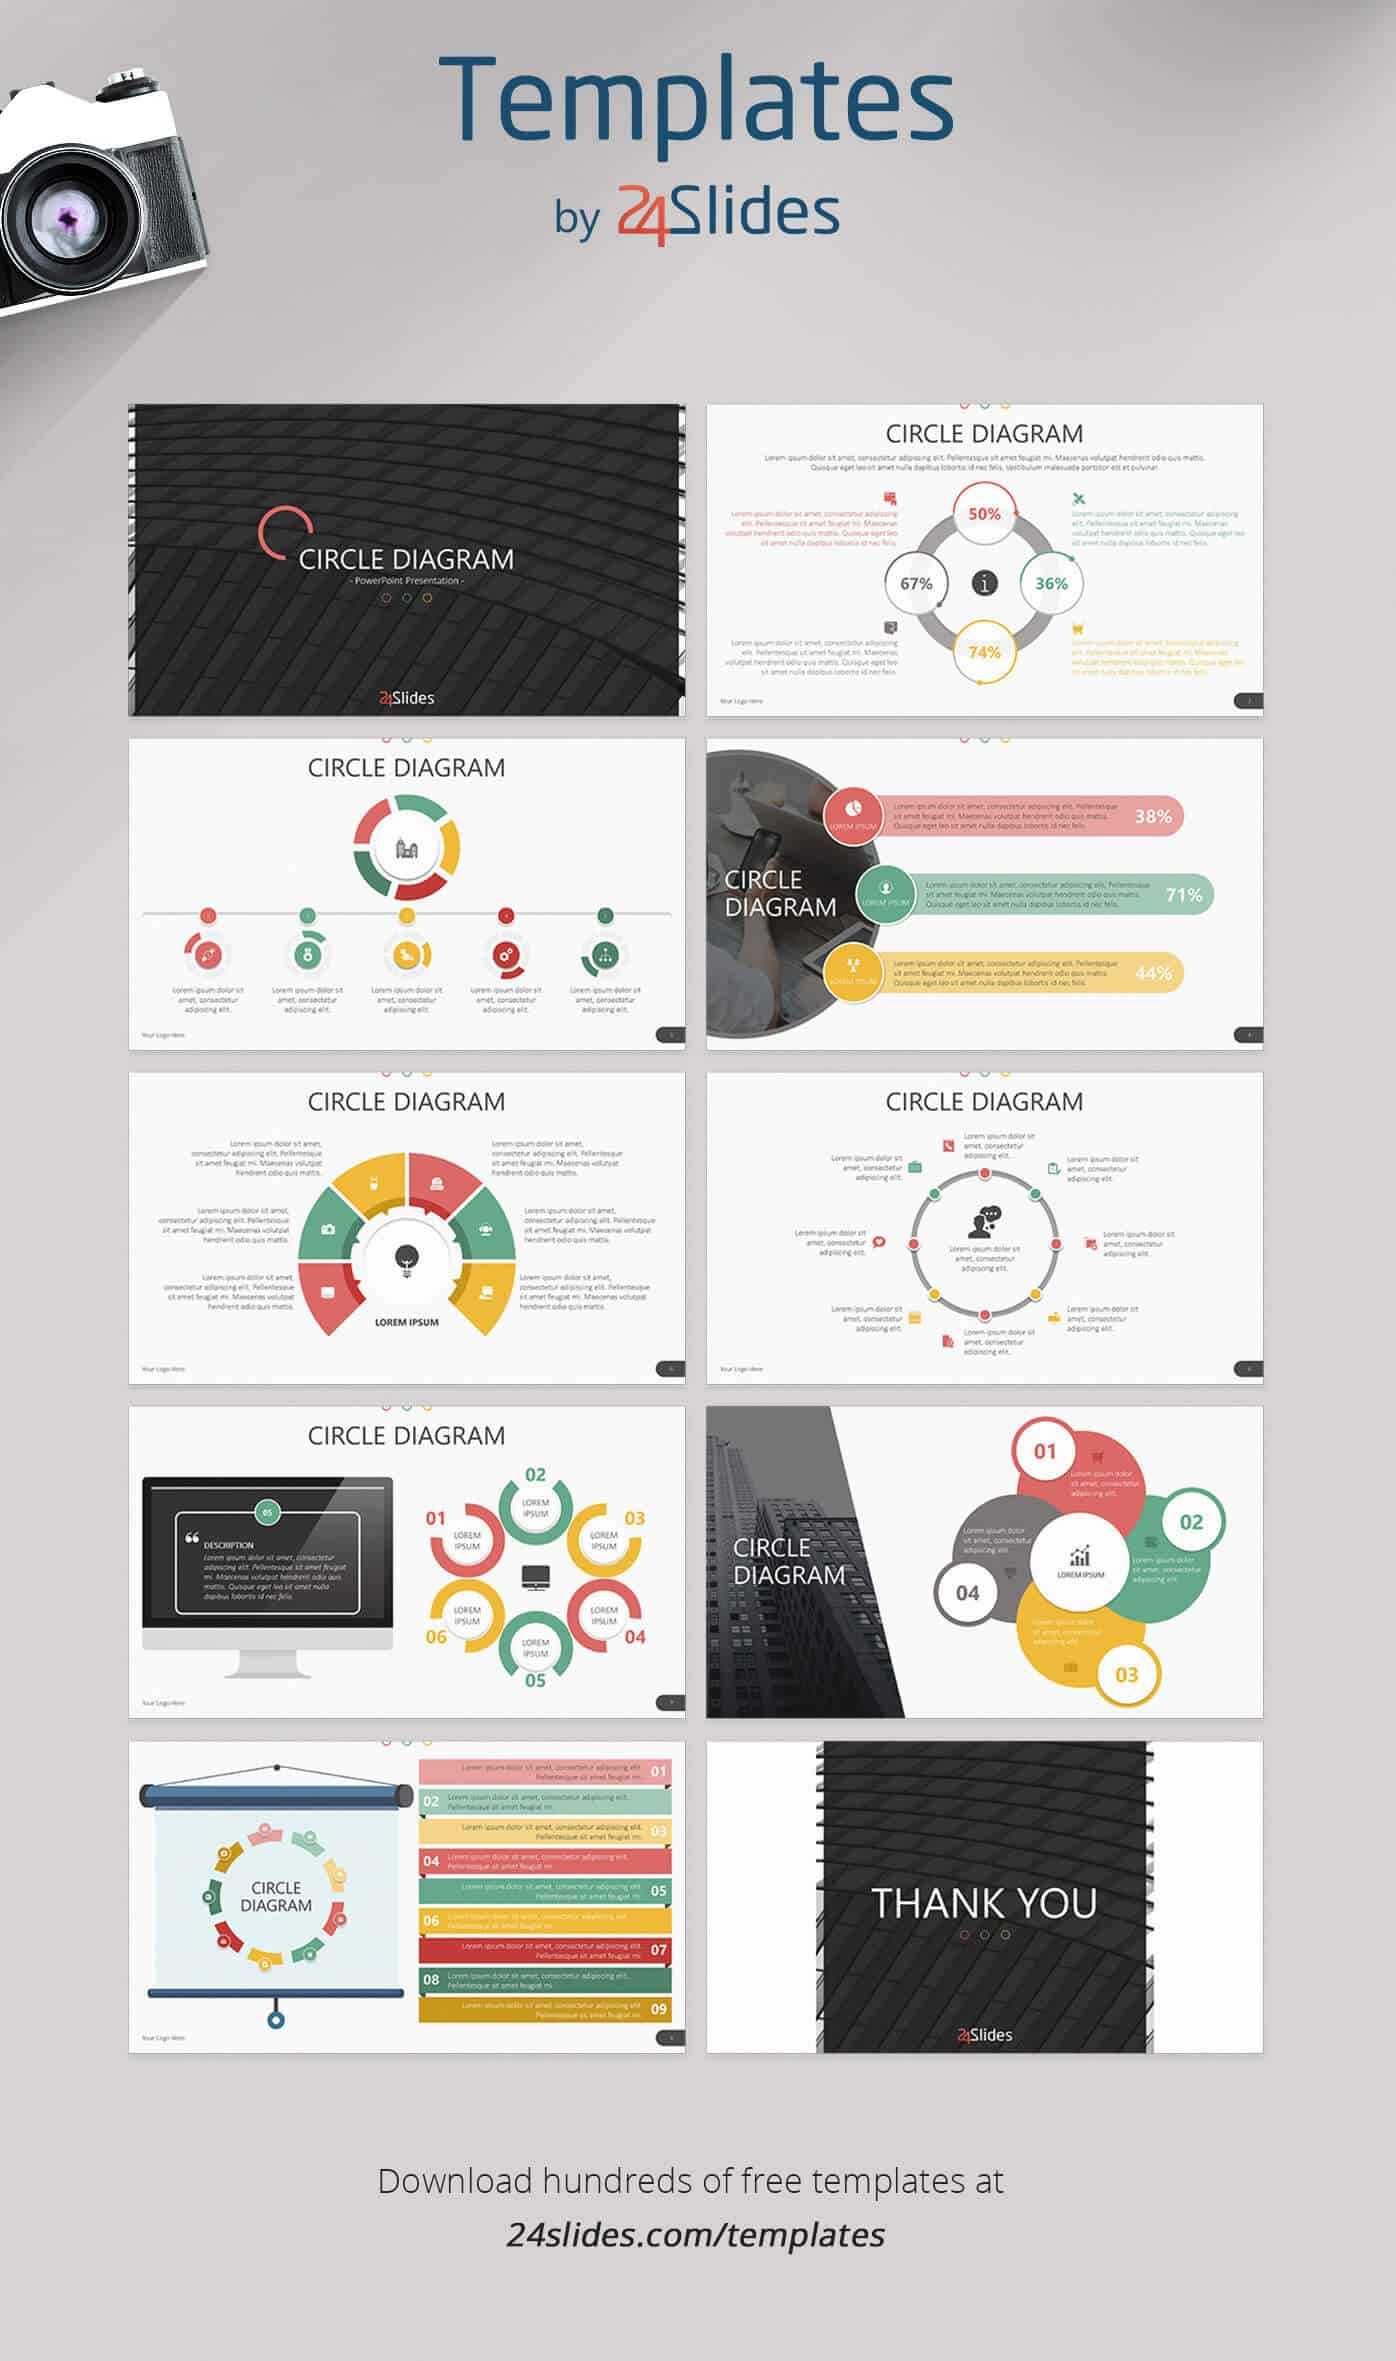 15 Fun And Colorful Free Powerpoint Templates | Present Better Within Fun Powerpoint Templates Free Download